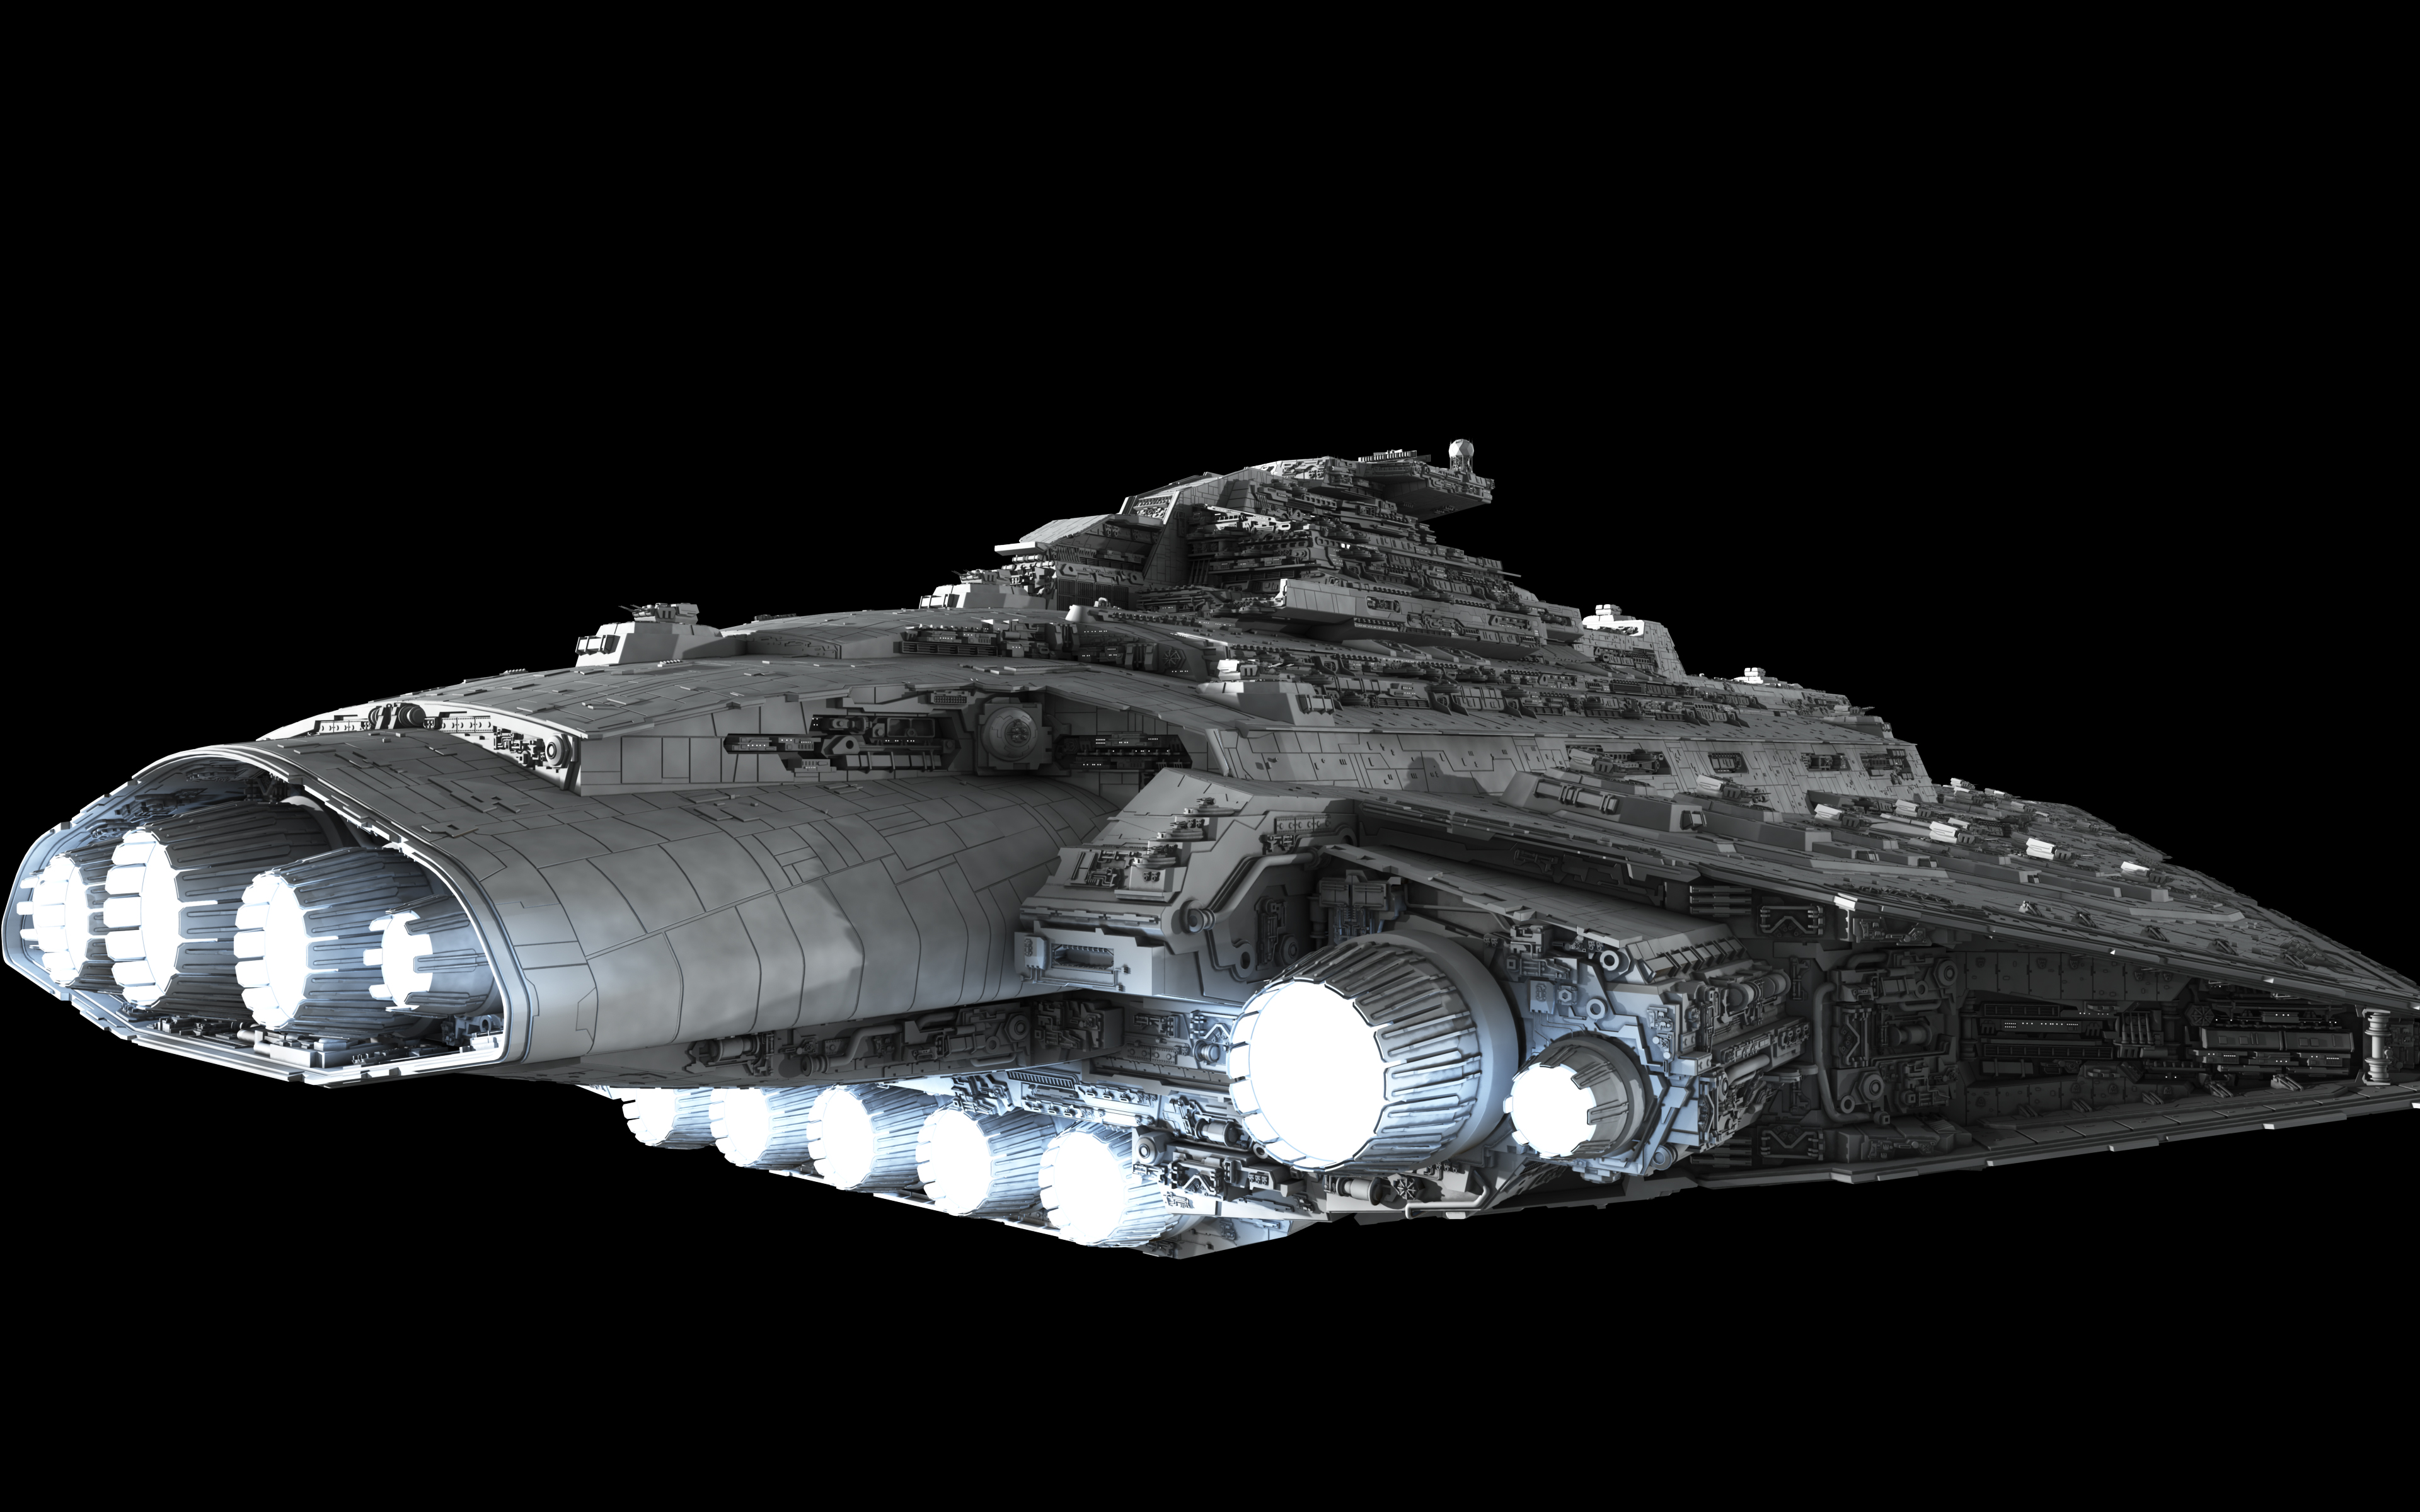 Star Destroyer Wallpaper So This Is What I